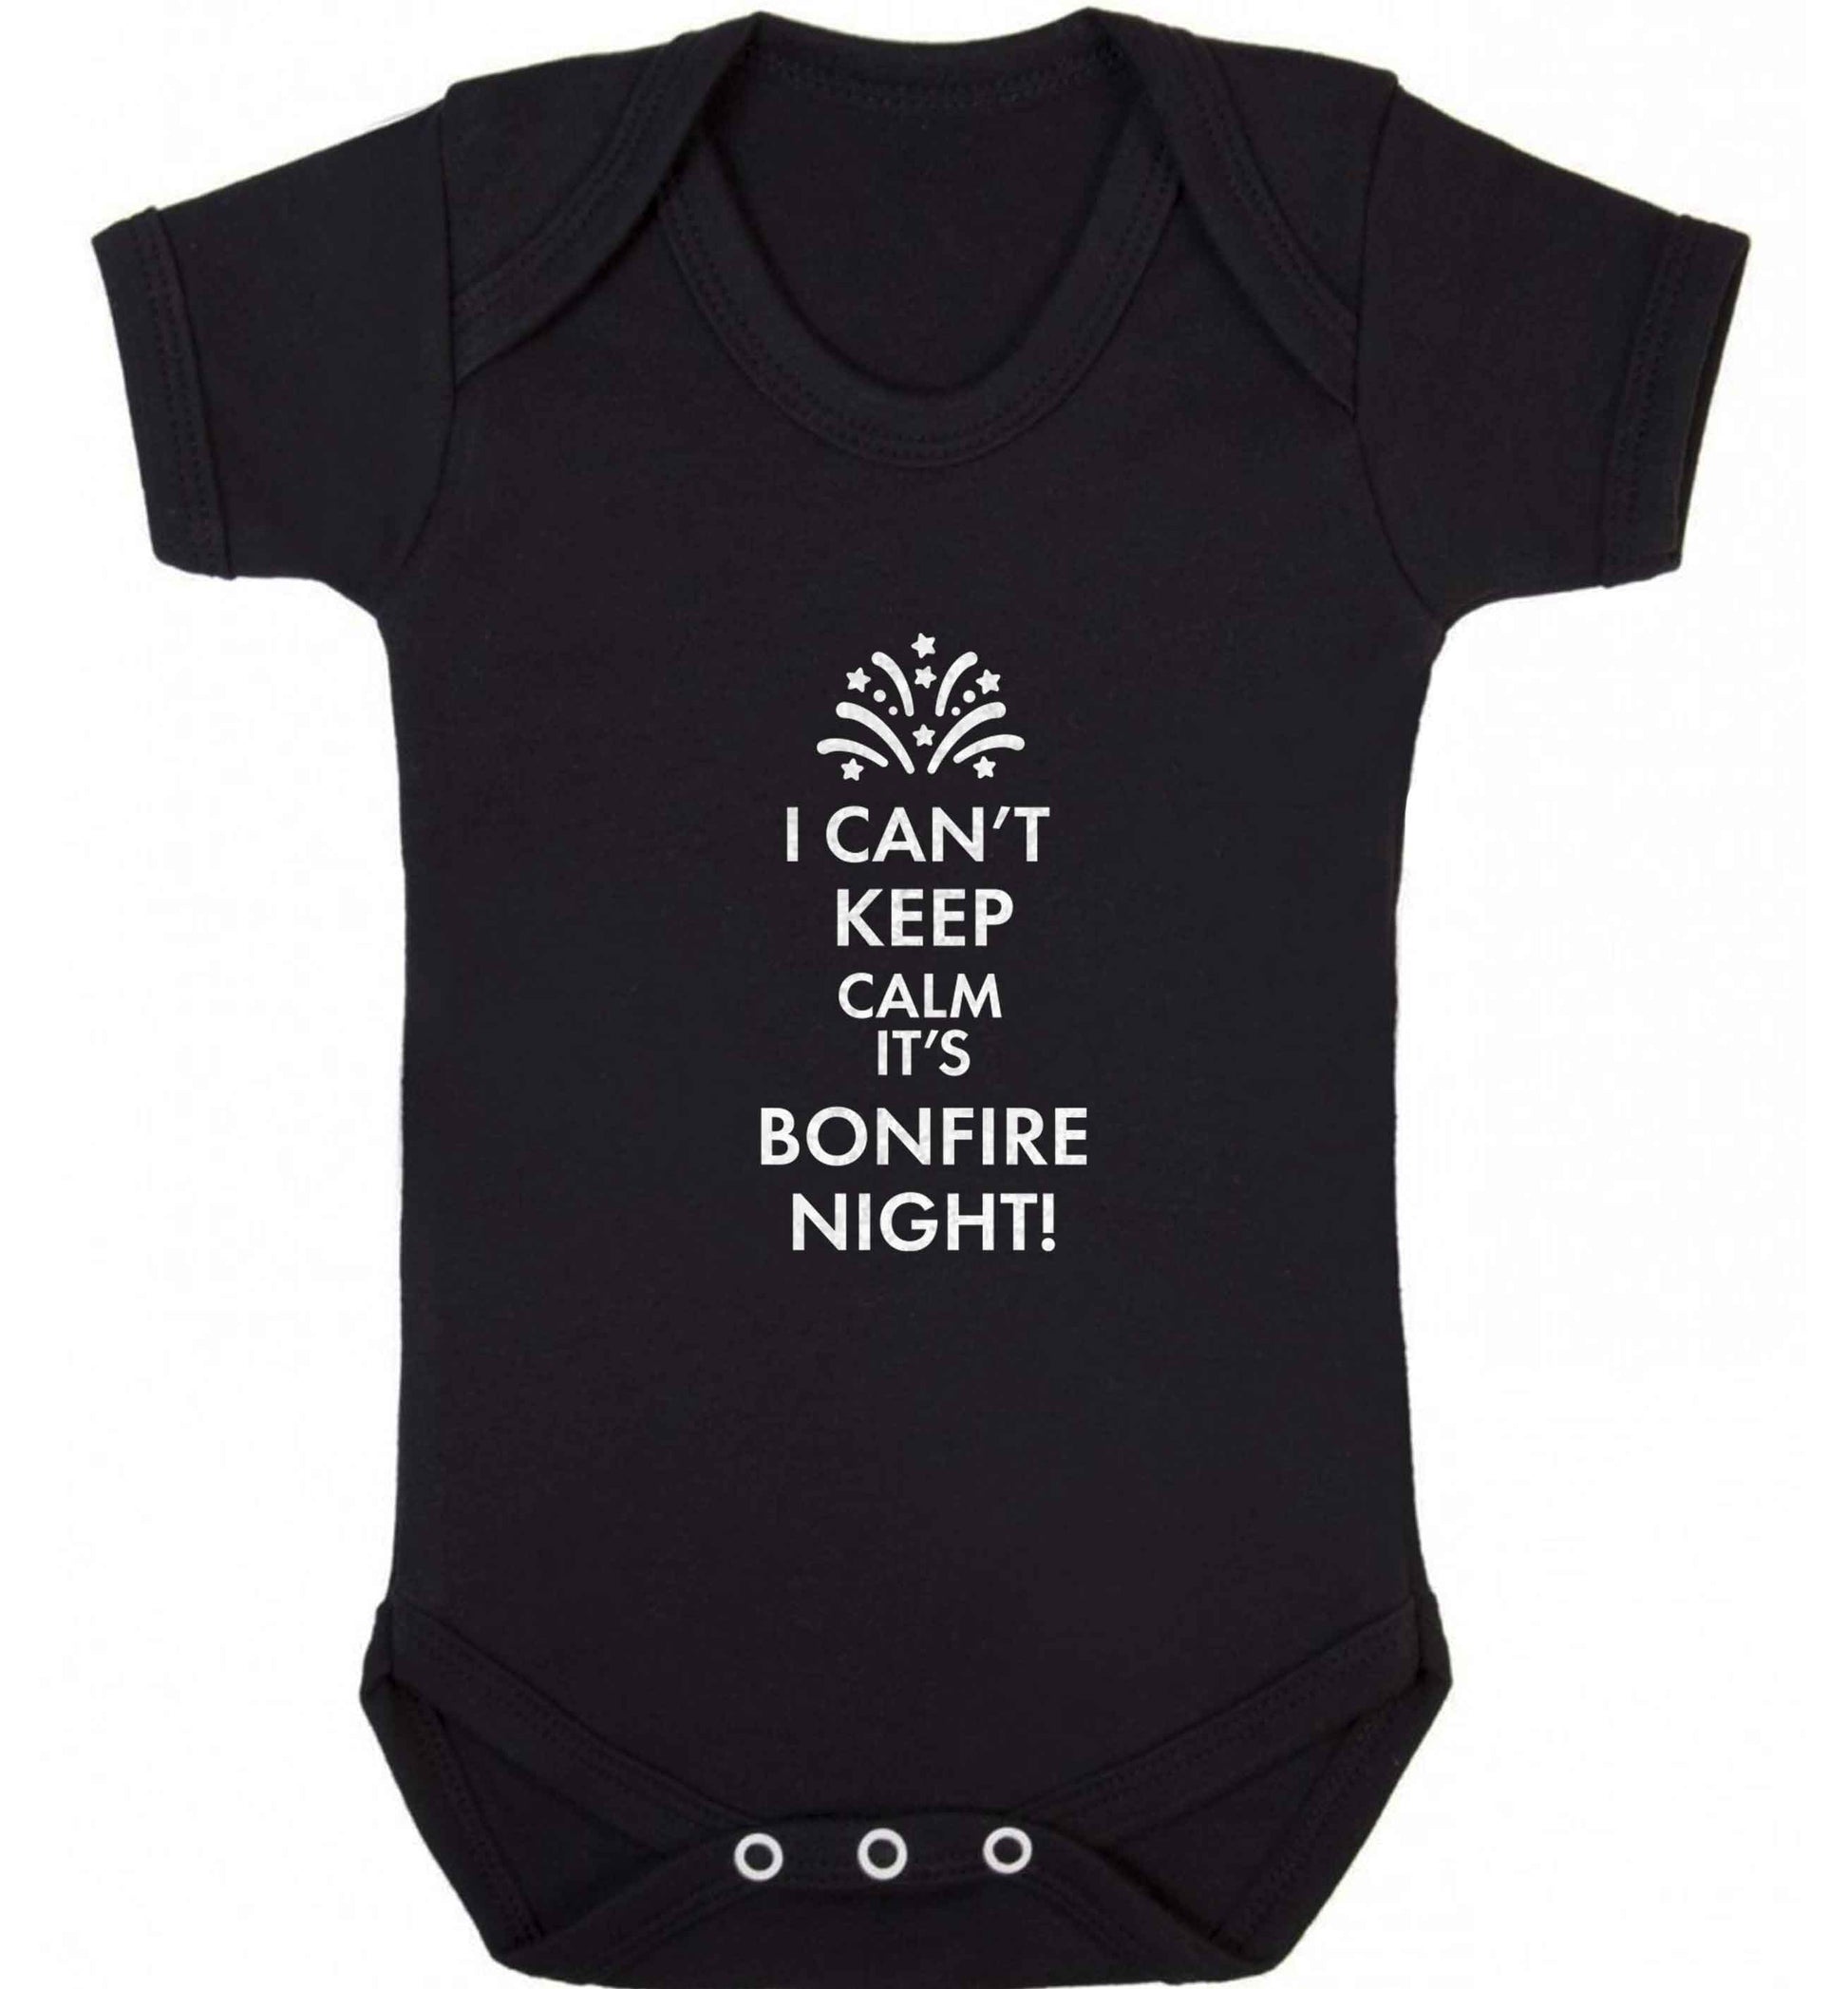 I can't keep calm its bonfire night baby vest black 18-24 months